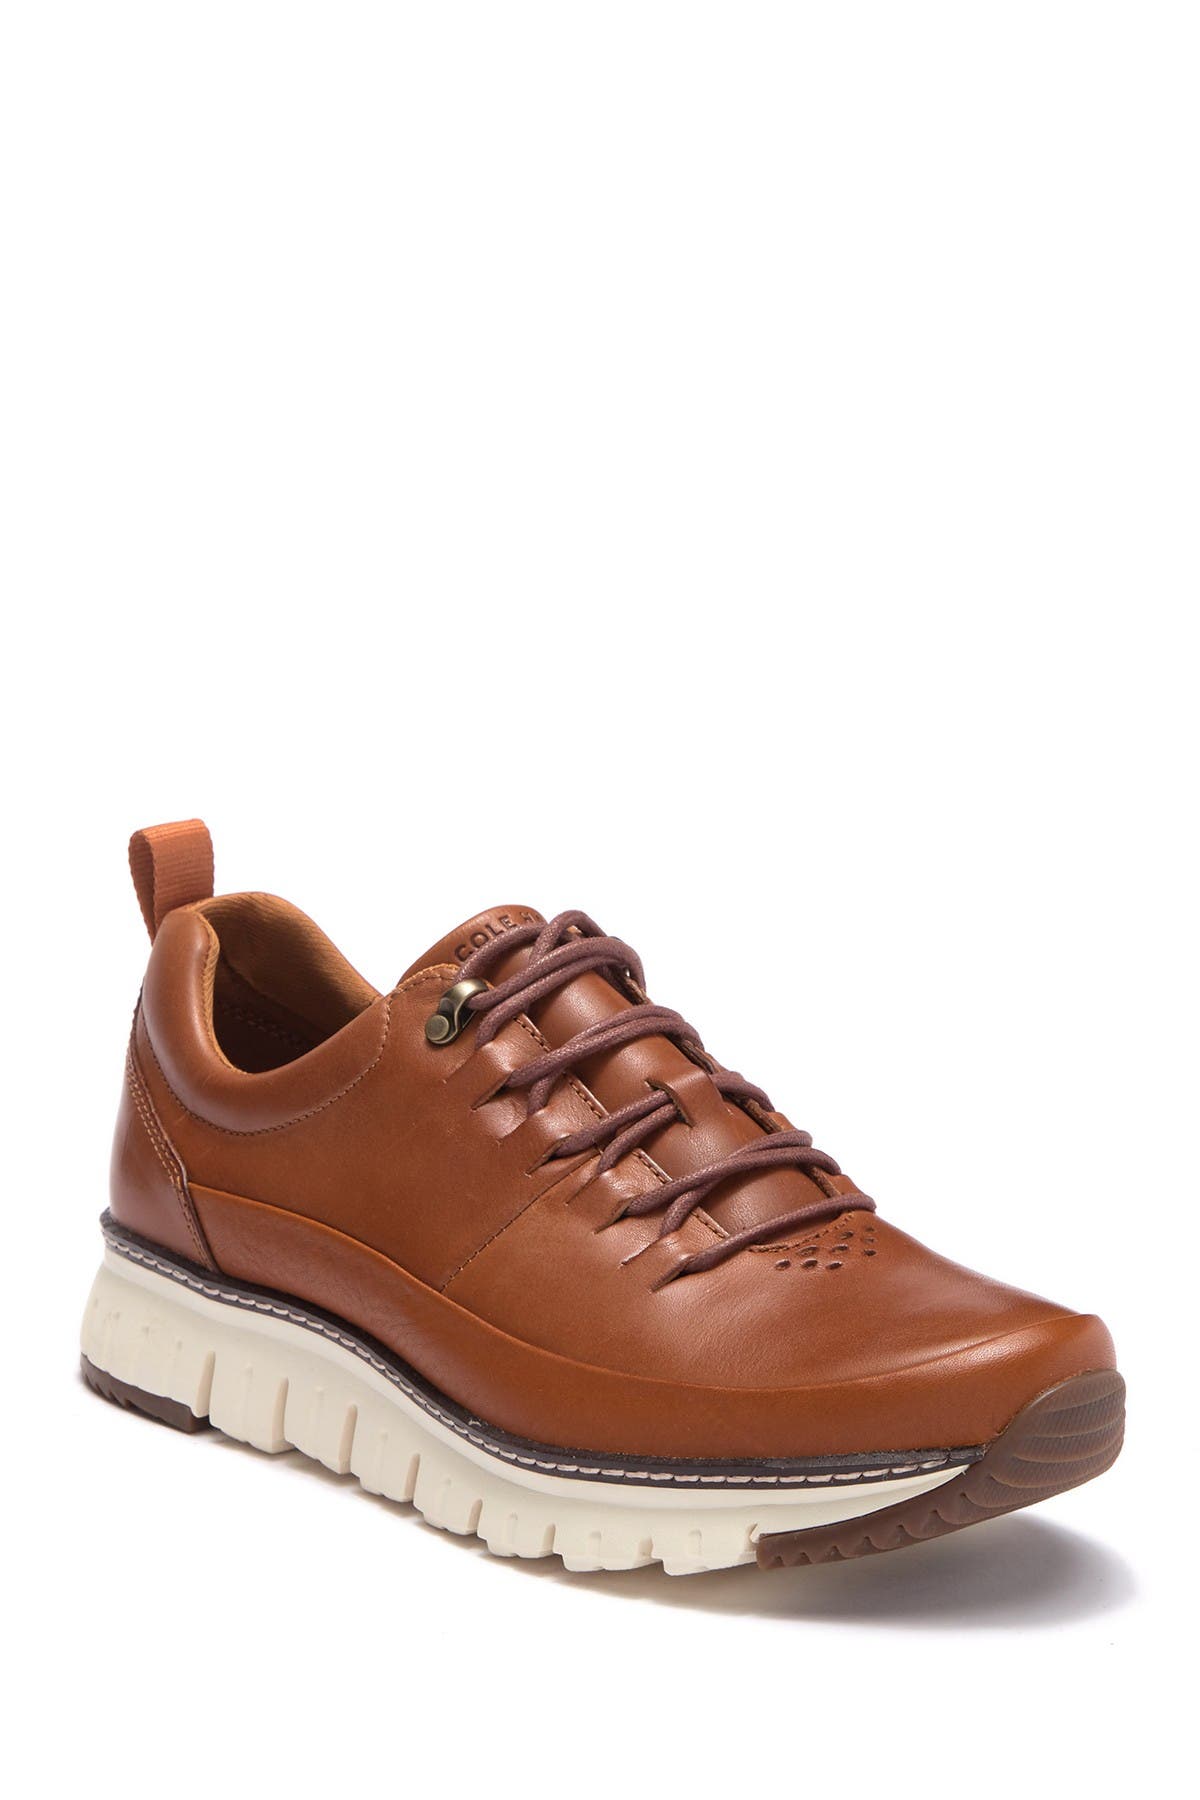 cole haan outlet zerogrand